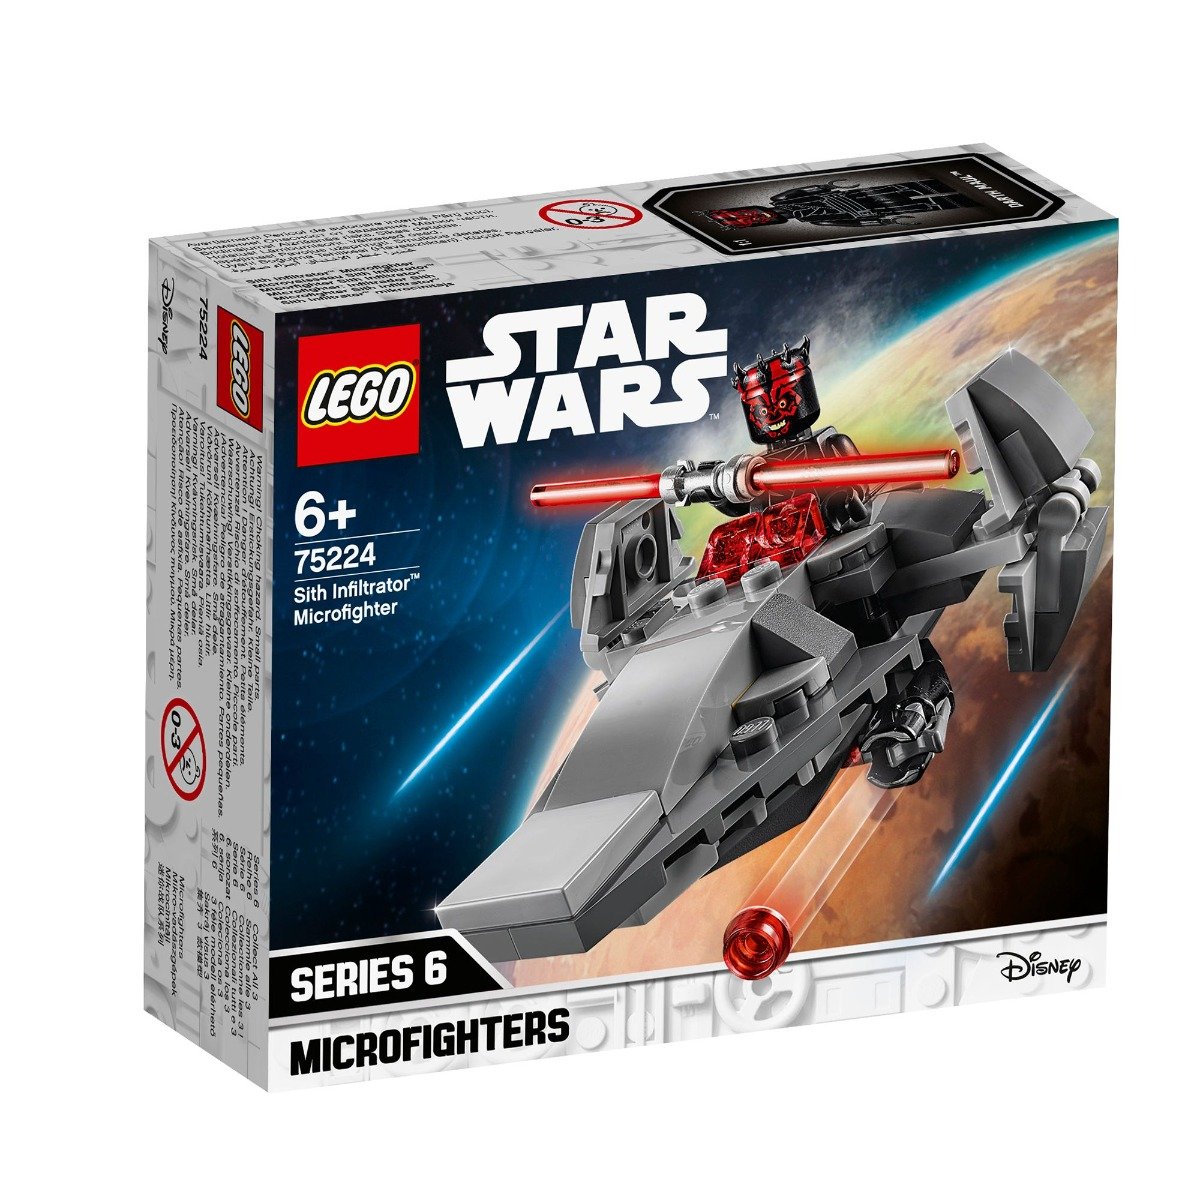 LEGO® Star Wars™ - Sith Infiltrator™ Microfighter (75224)